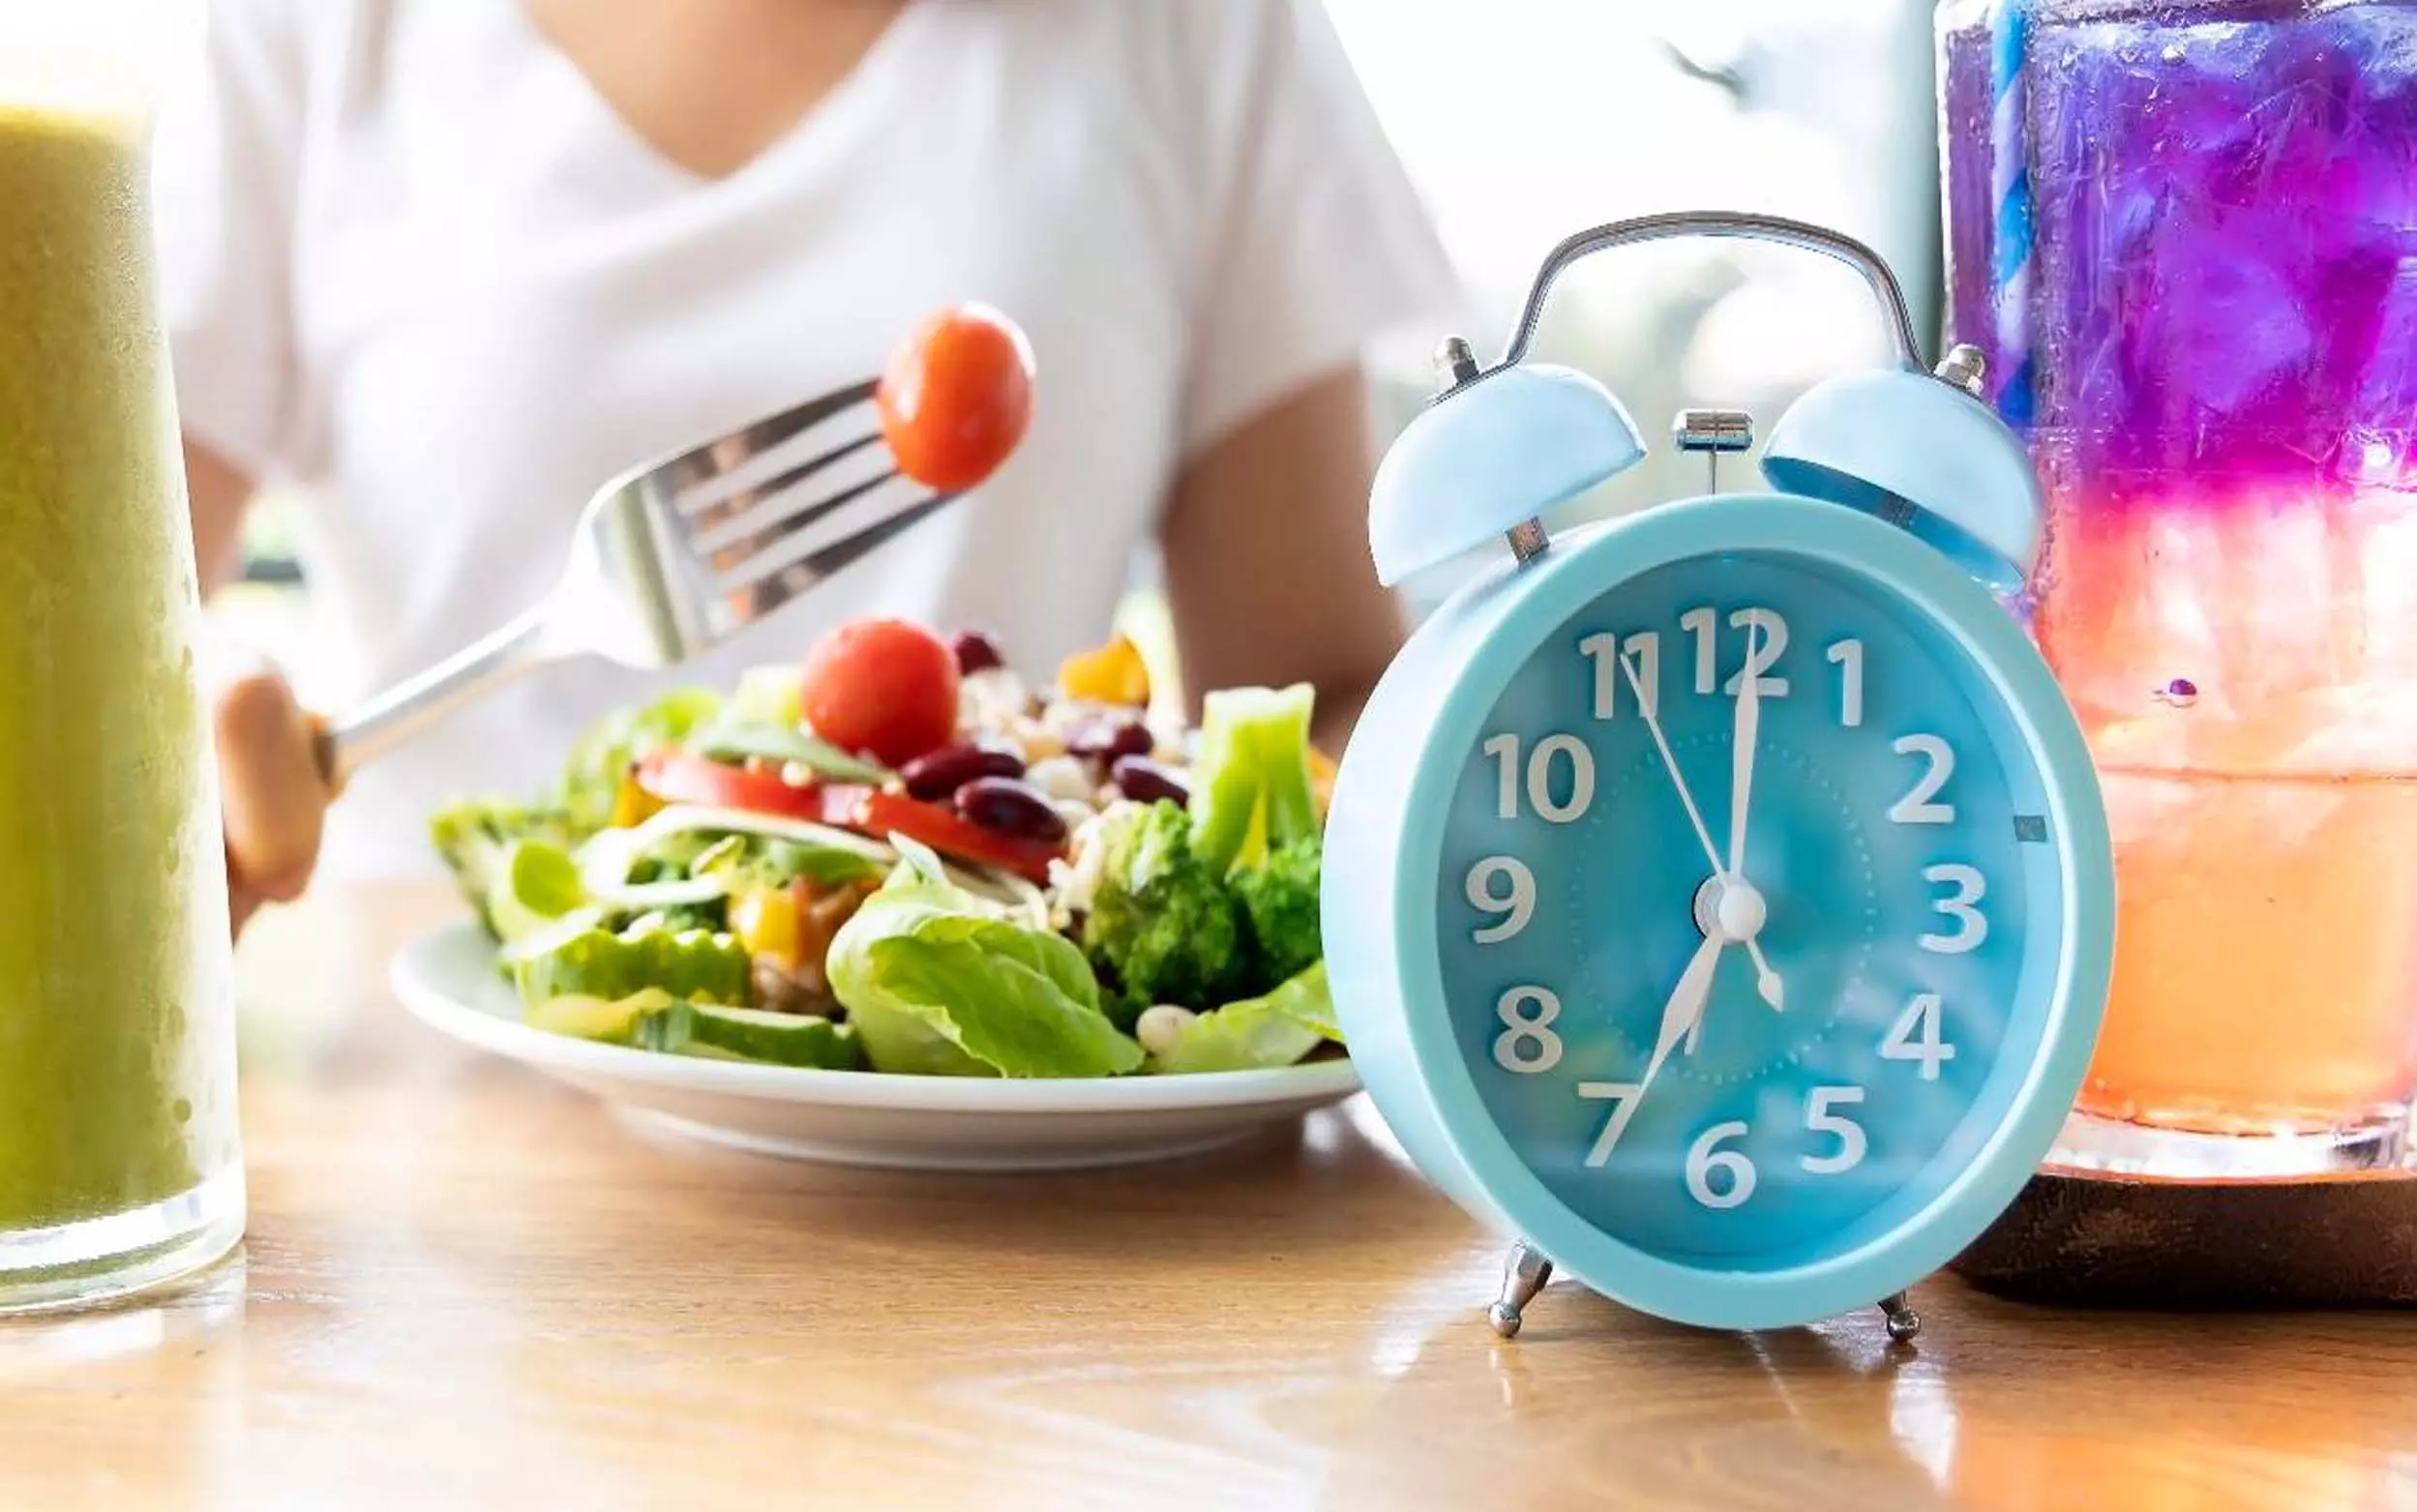 Risk of death from heart disease due to intermittent fasting